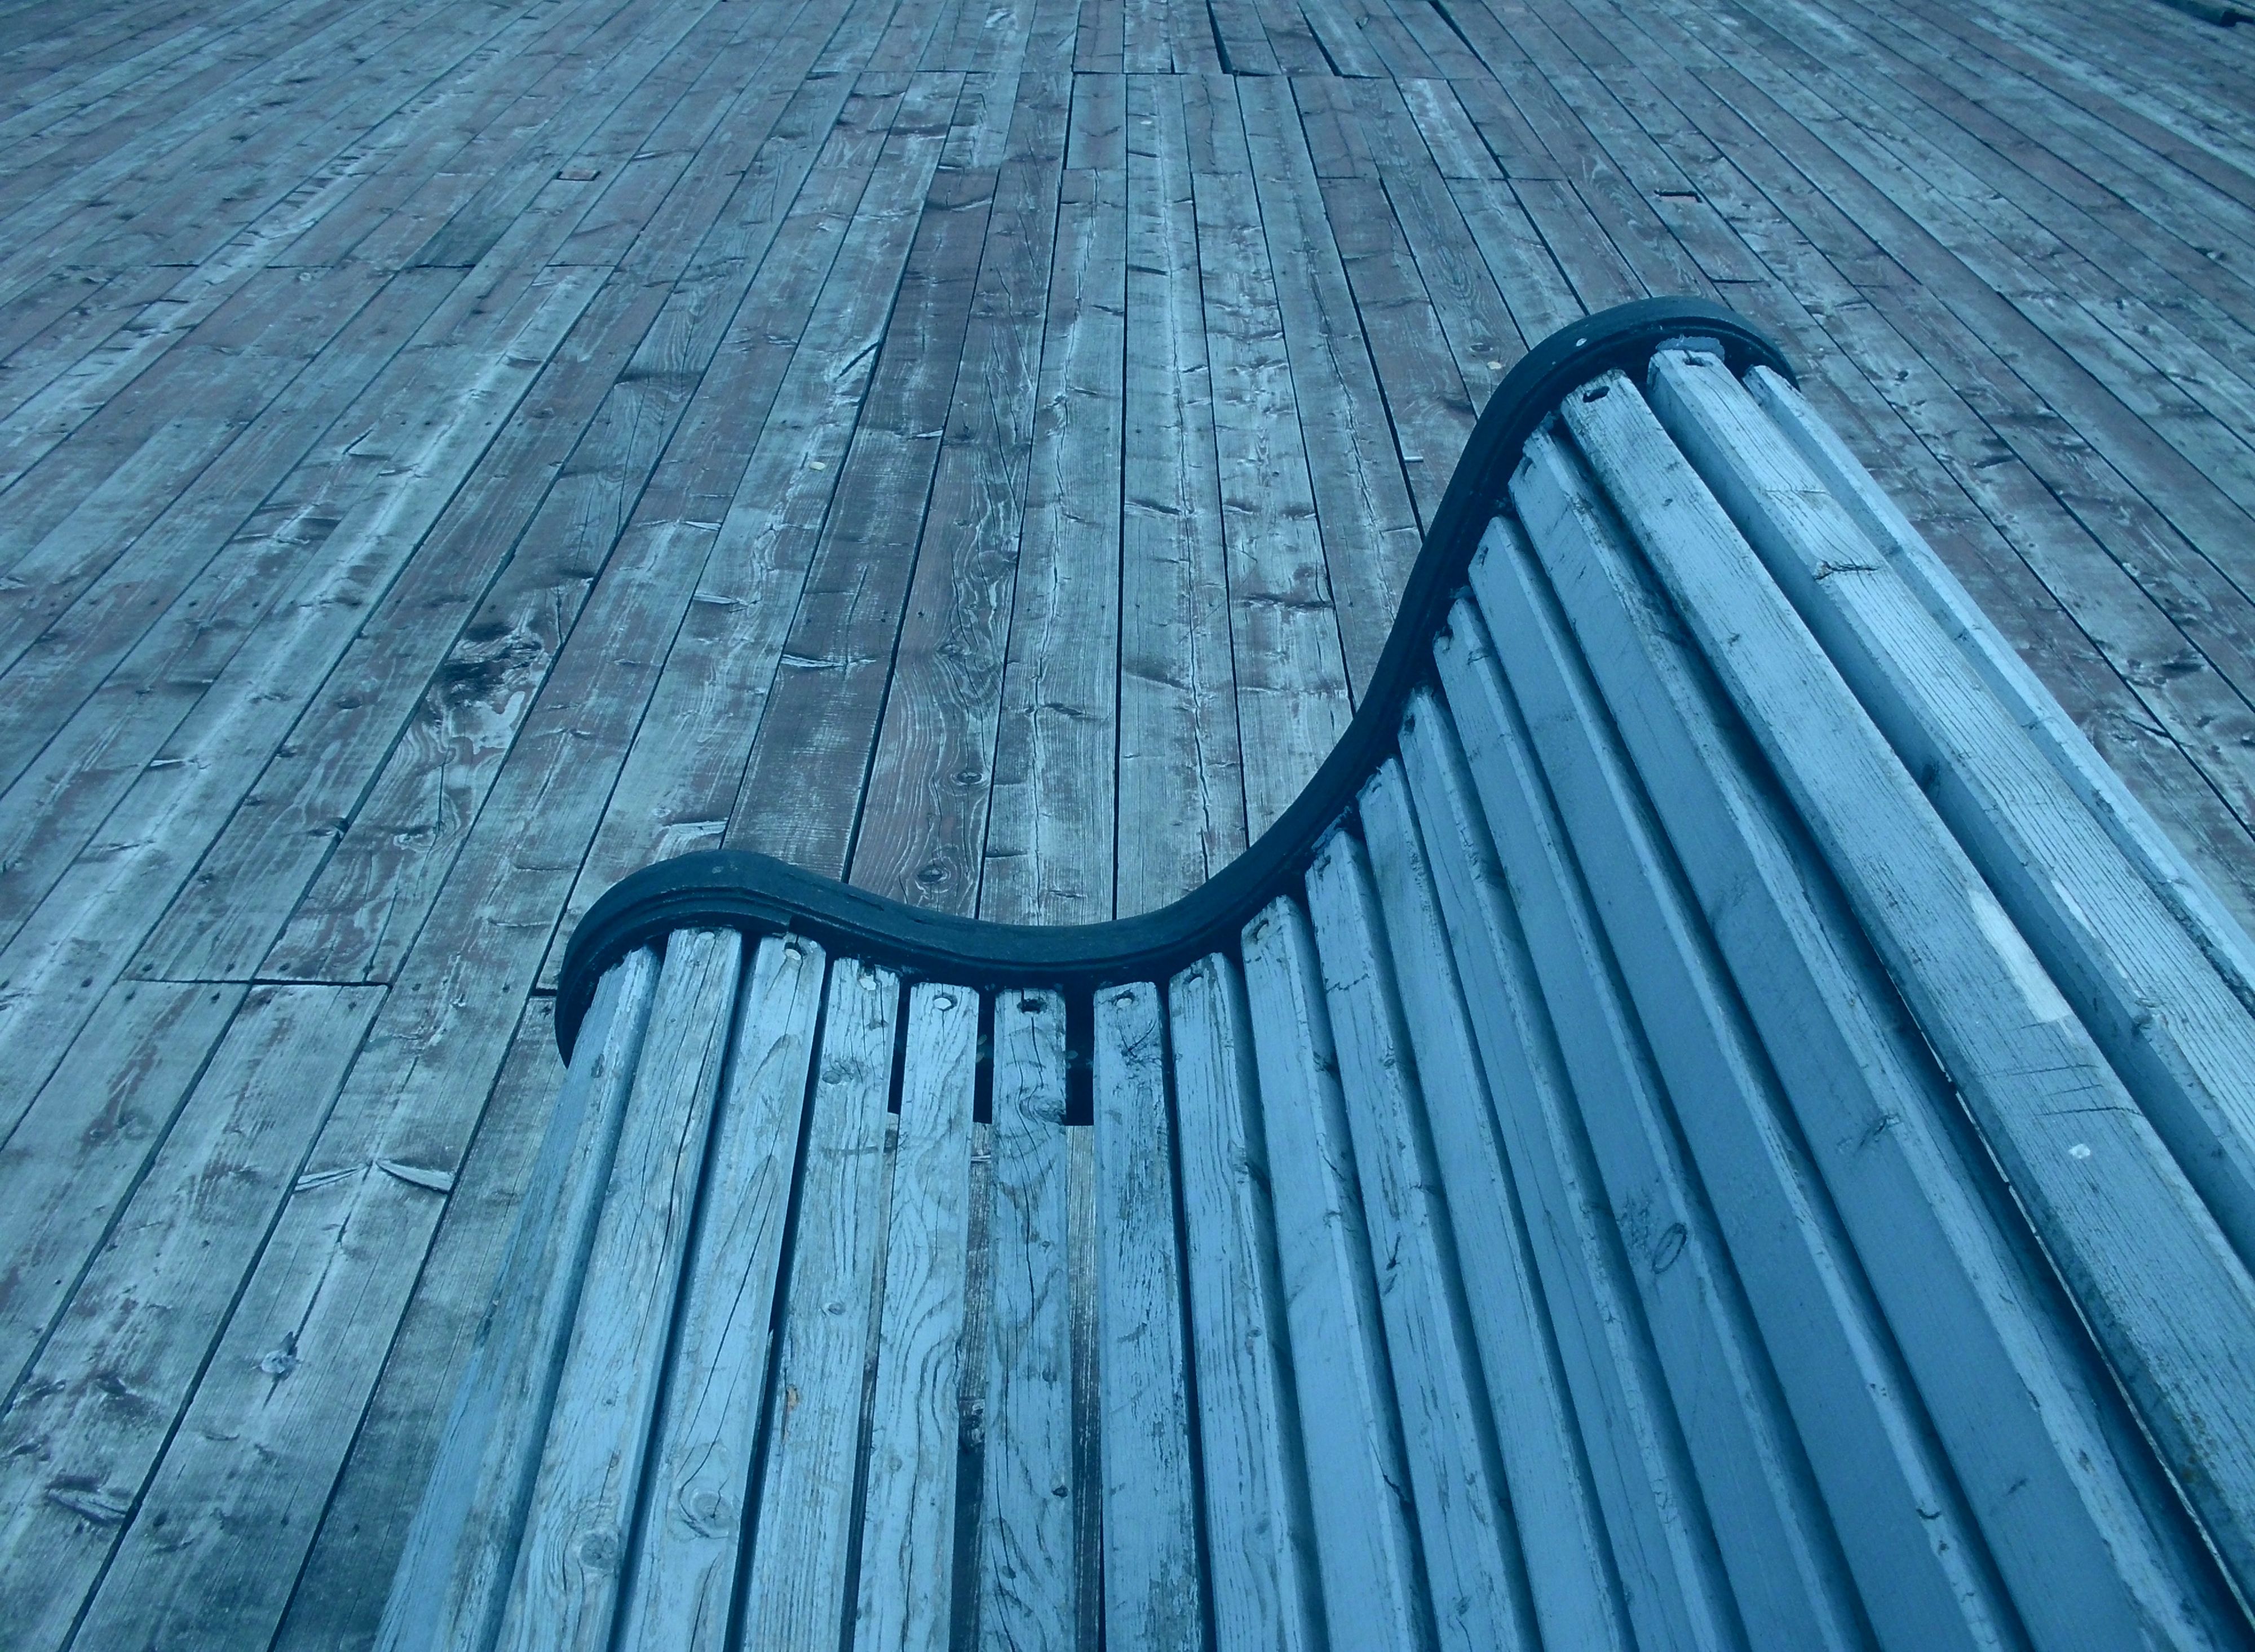 Park bench in perspective.Garden bench from close up. Wood material. Close up shot effect..jpg